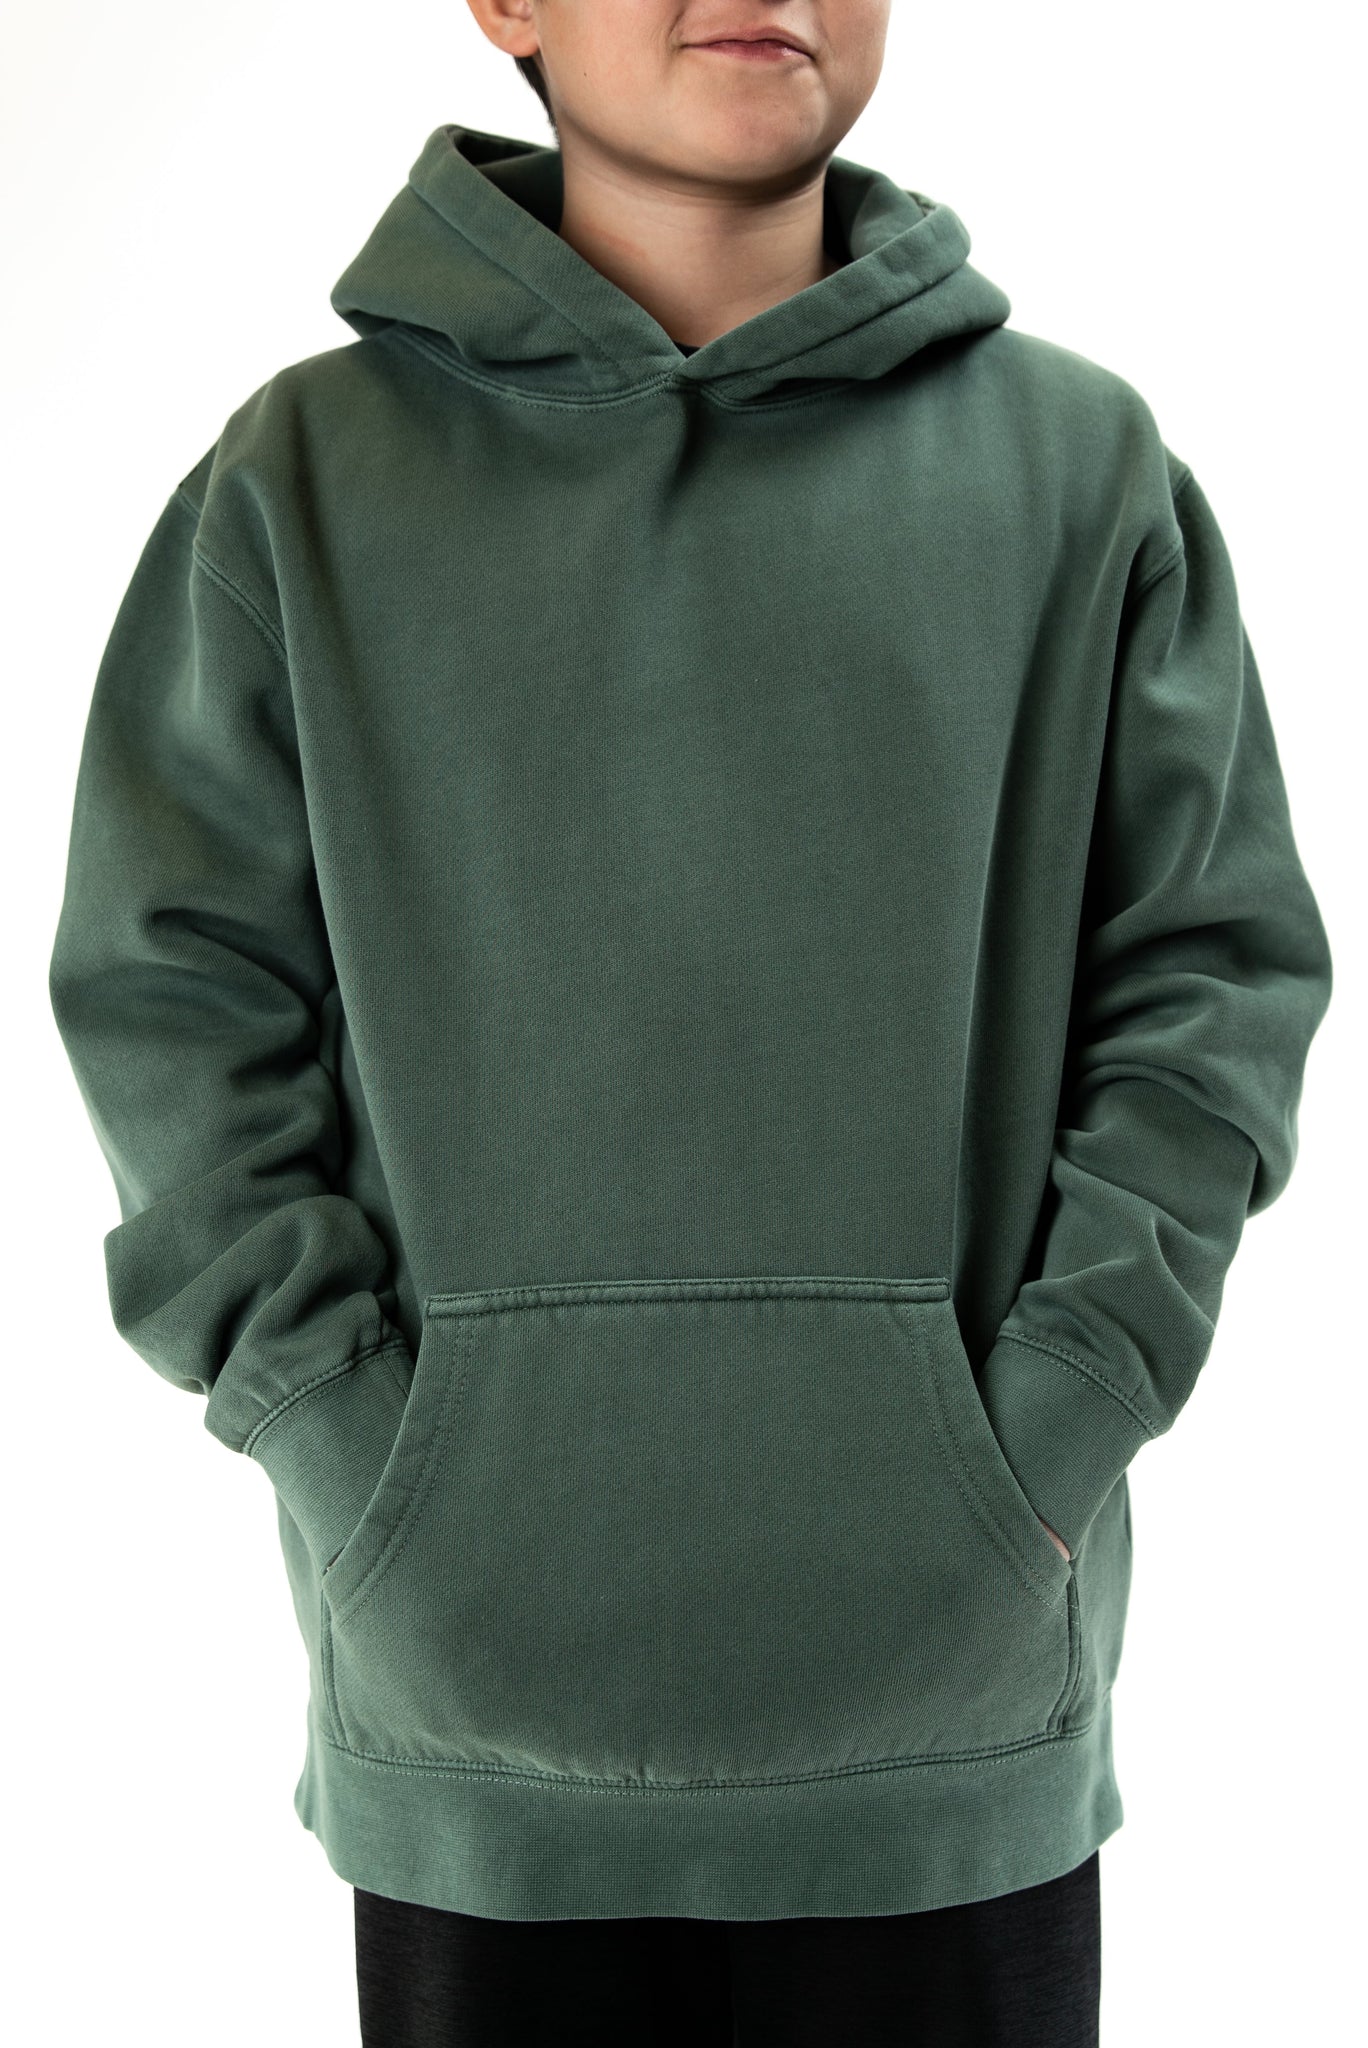 IND4001YPD - Youth Heavyweight Pigment Dye Hoodie Alpine